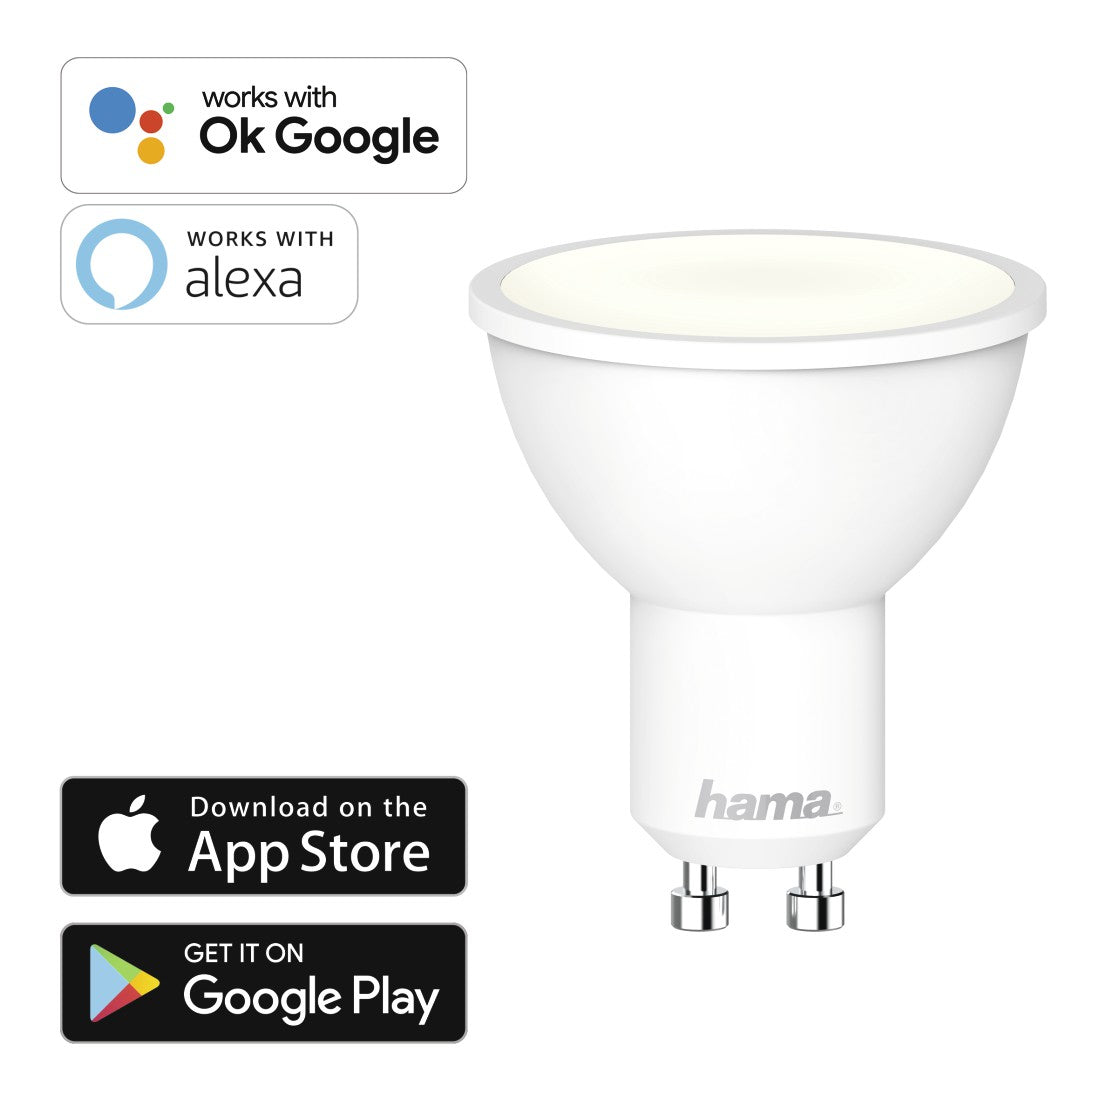 WiFi-LED Light HAMA, GU10, 5.5W, white, can be dimmed, 400Lm, for voice app/control